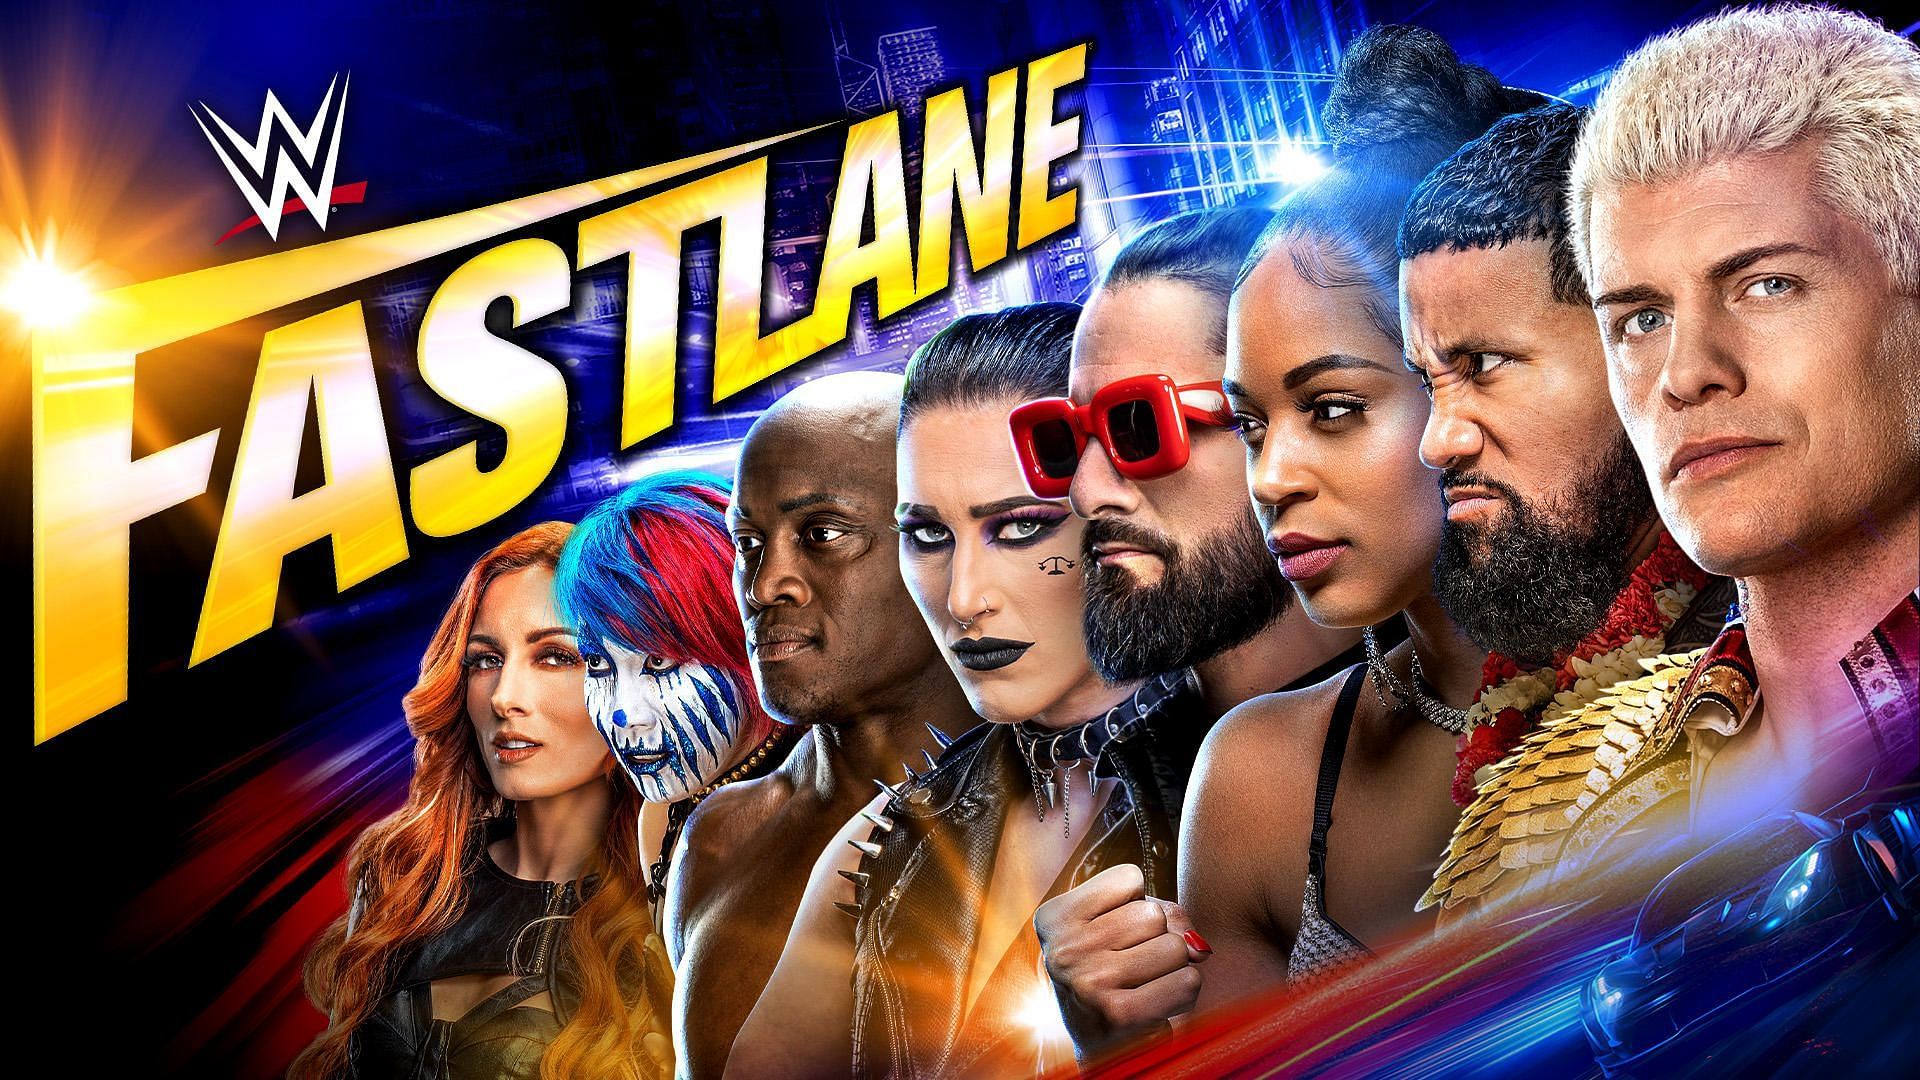 WWE has added a fourth high-prfile match to Fastlane 2023 featuring current champion